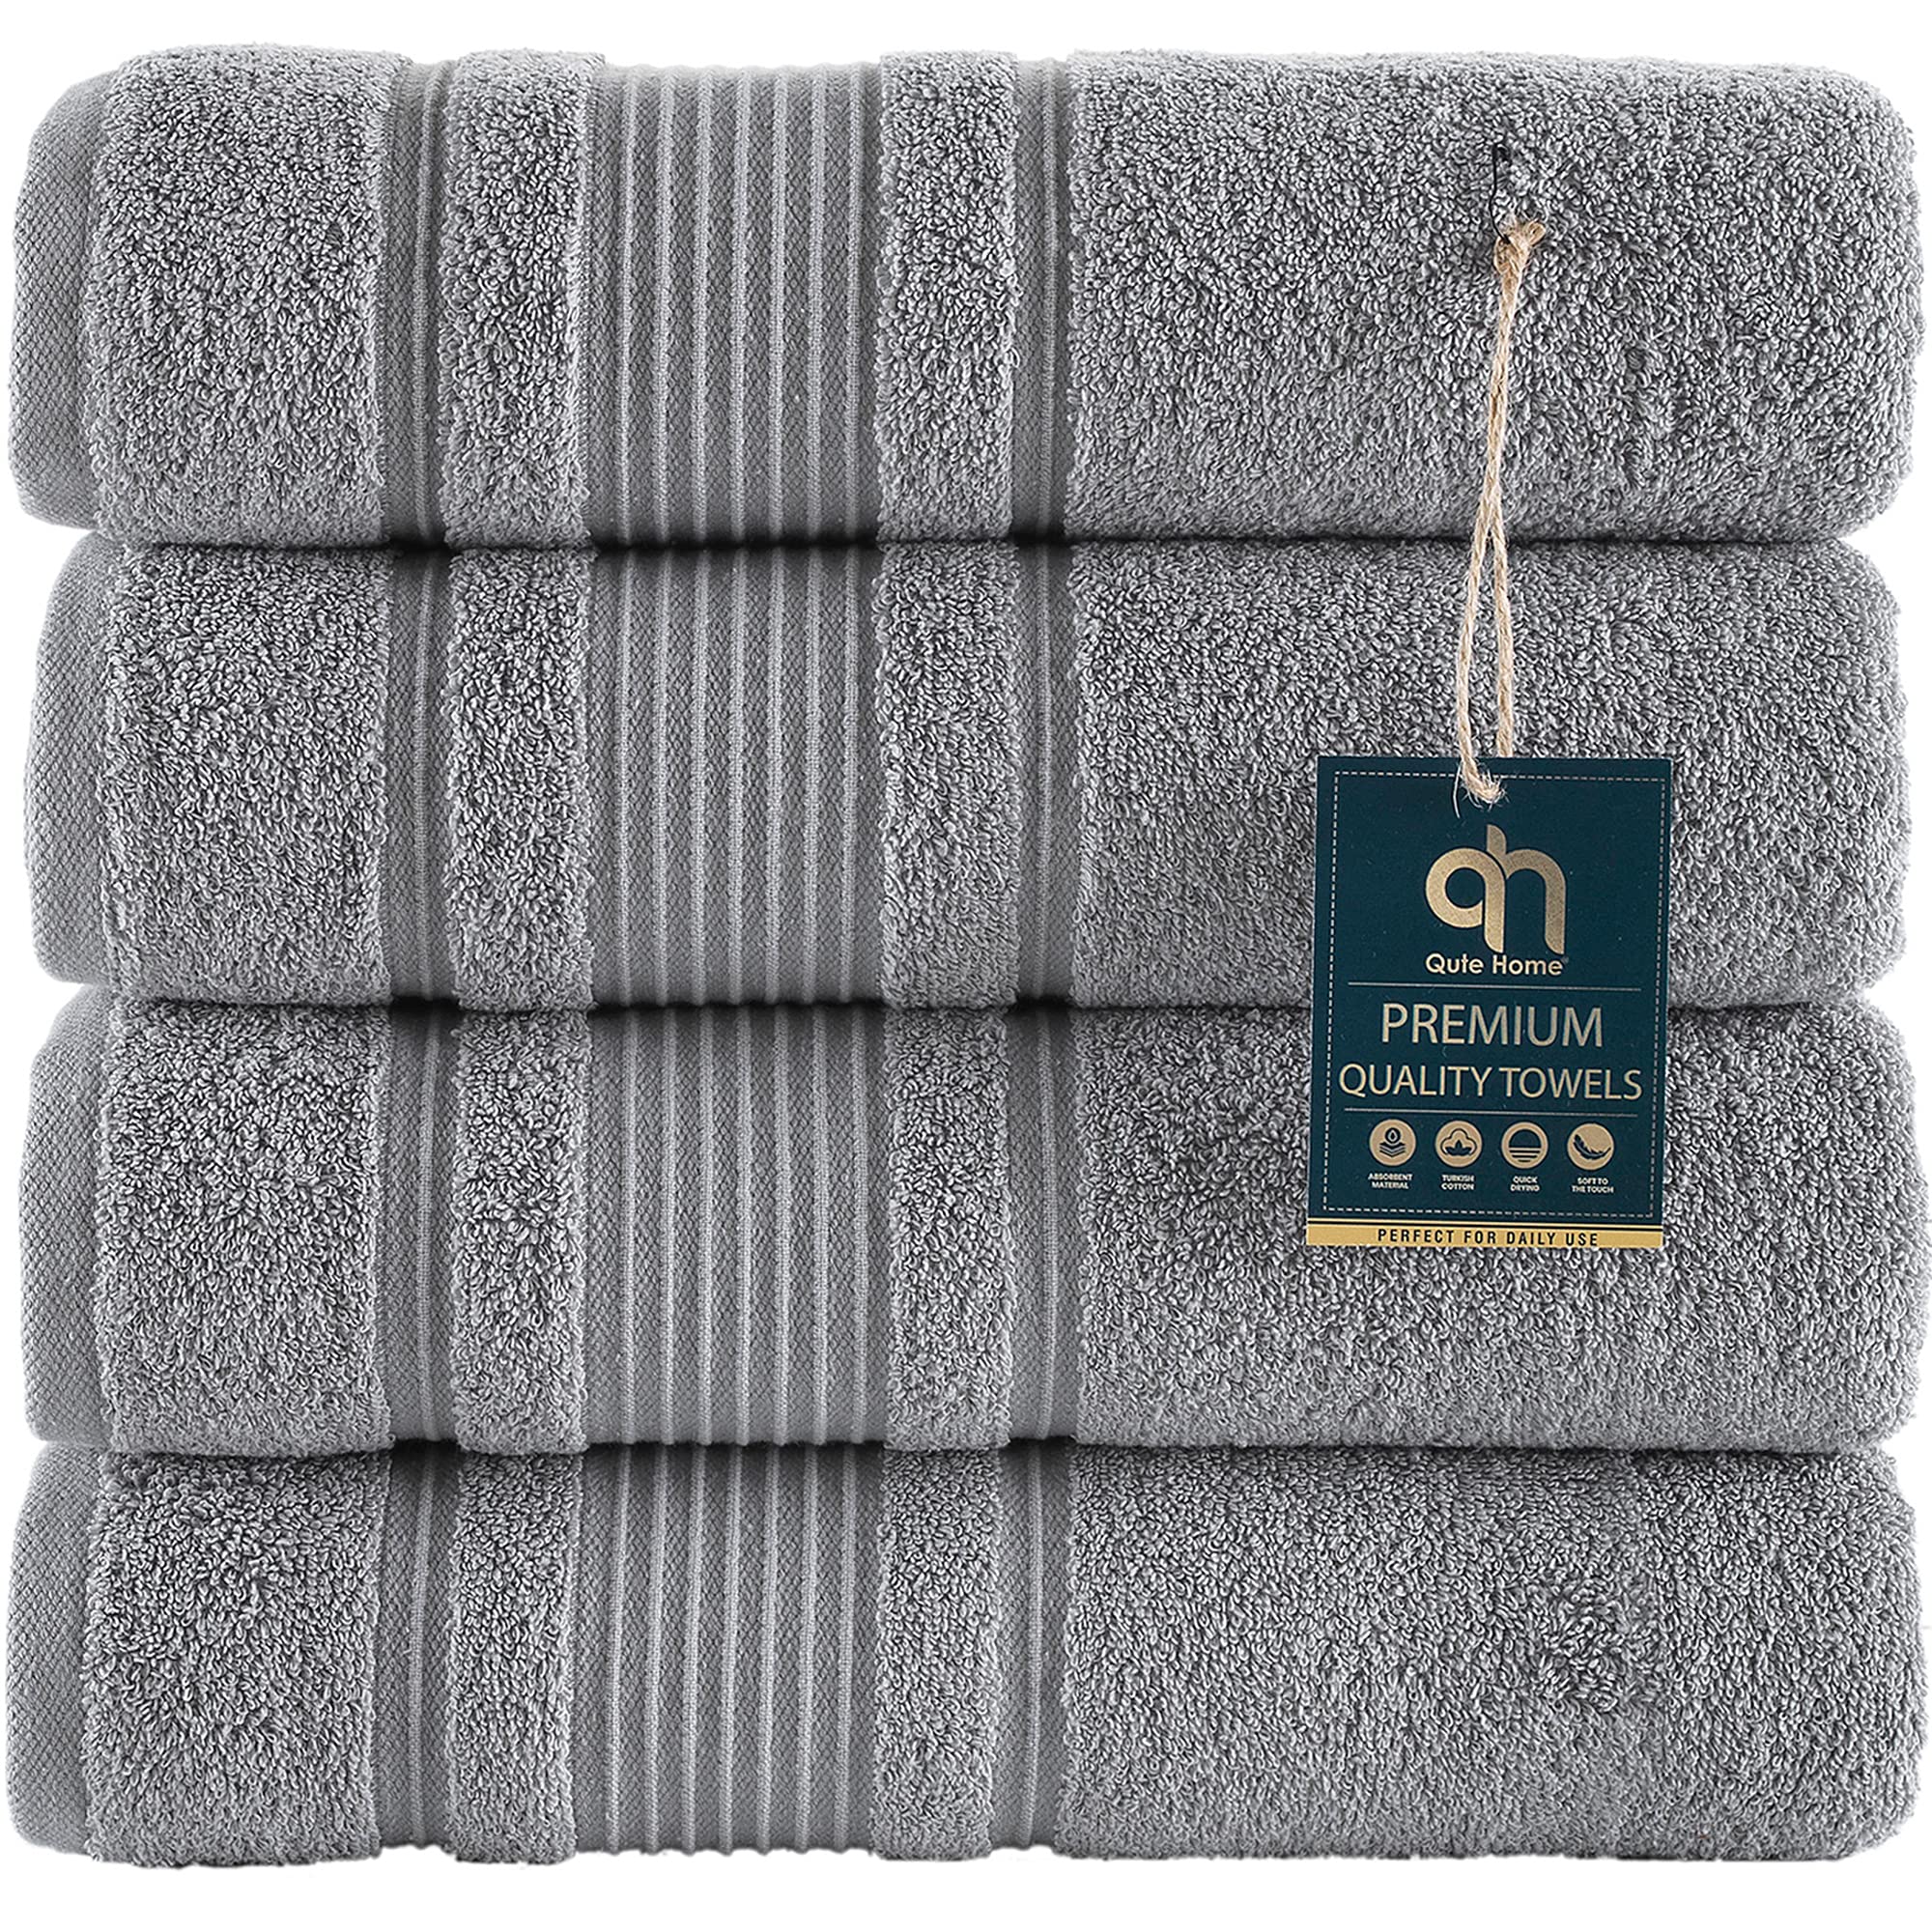 Book Cover Qute Home 4-Piece Bath Towels Set, 100% Turkish Cotton Premium Quality Towels for Bathroom, Quick Dry Soft and Absorbent Turkish Towel, Set Includes 4 Bath Towels (Grey) 4 Pieces Bath Towels Grey